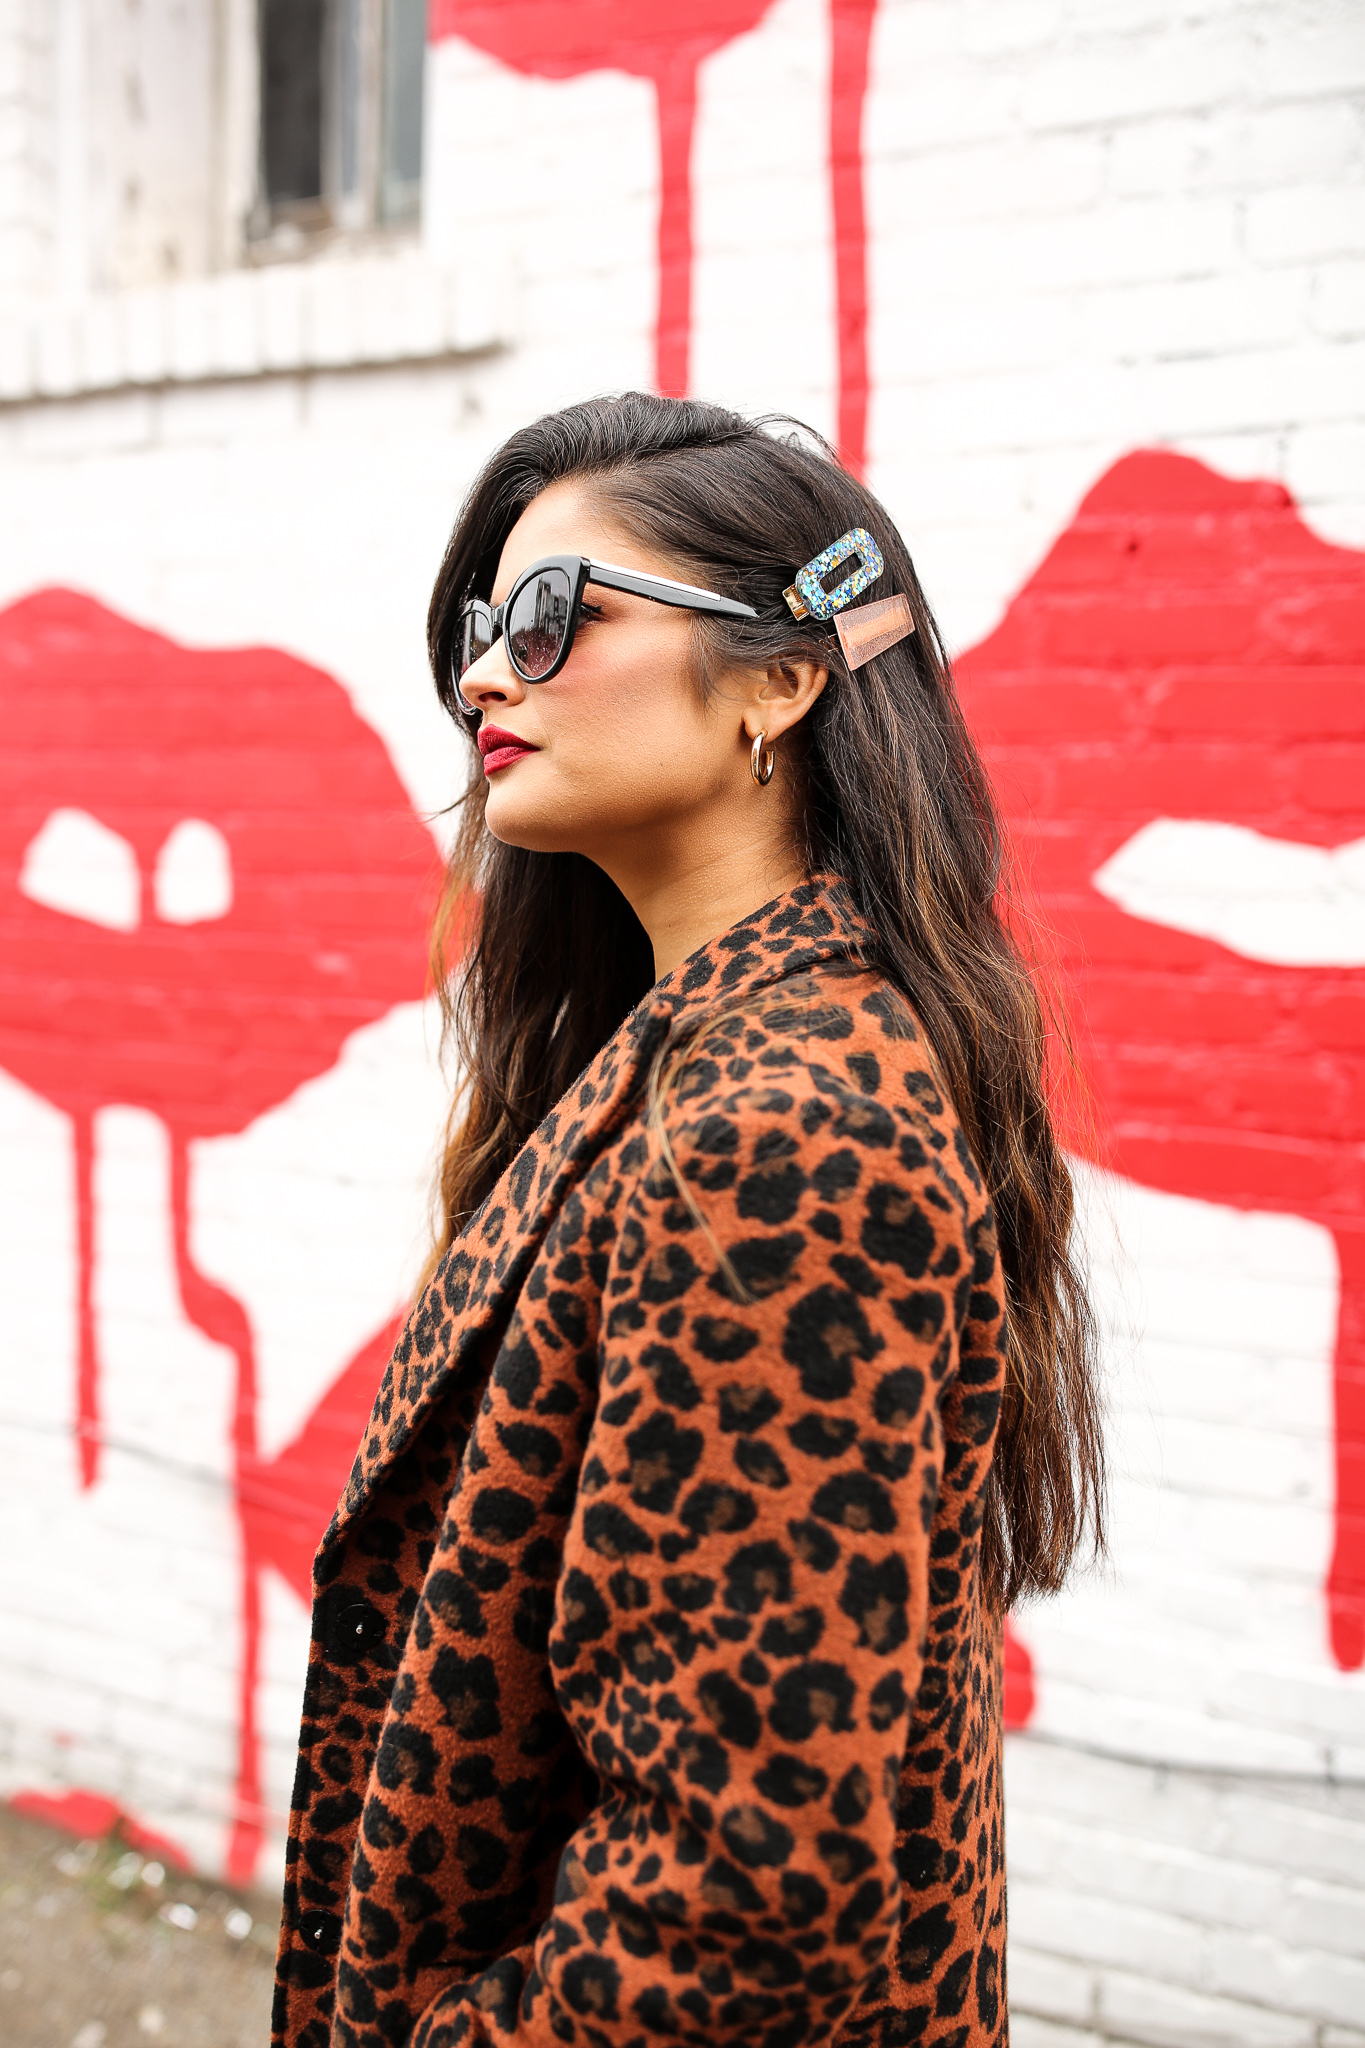 Priya the Blog, Nashville style blog, Nashville styler blogger, Nashville fashion blog, Nashville fashion blogger, how to wear a leopard coat, vintage graphic t-shirt, how to style a vintage graphic t-shirt, Stan Smith trainers, winter outfit, Stila Stay All Day Liquid Lipstick in Beso, Winter outfit with leopard print coat, Spanx faux leather leggings